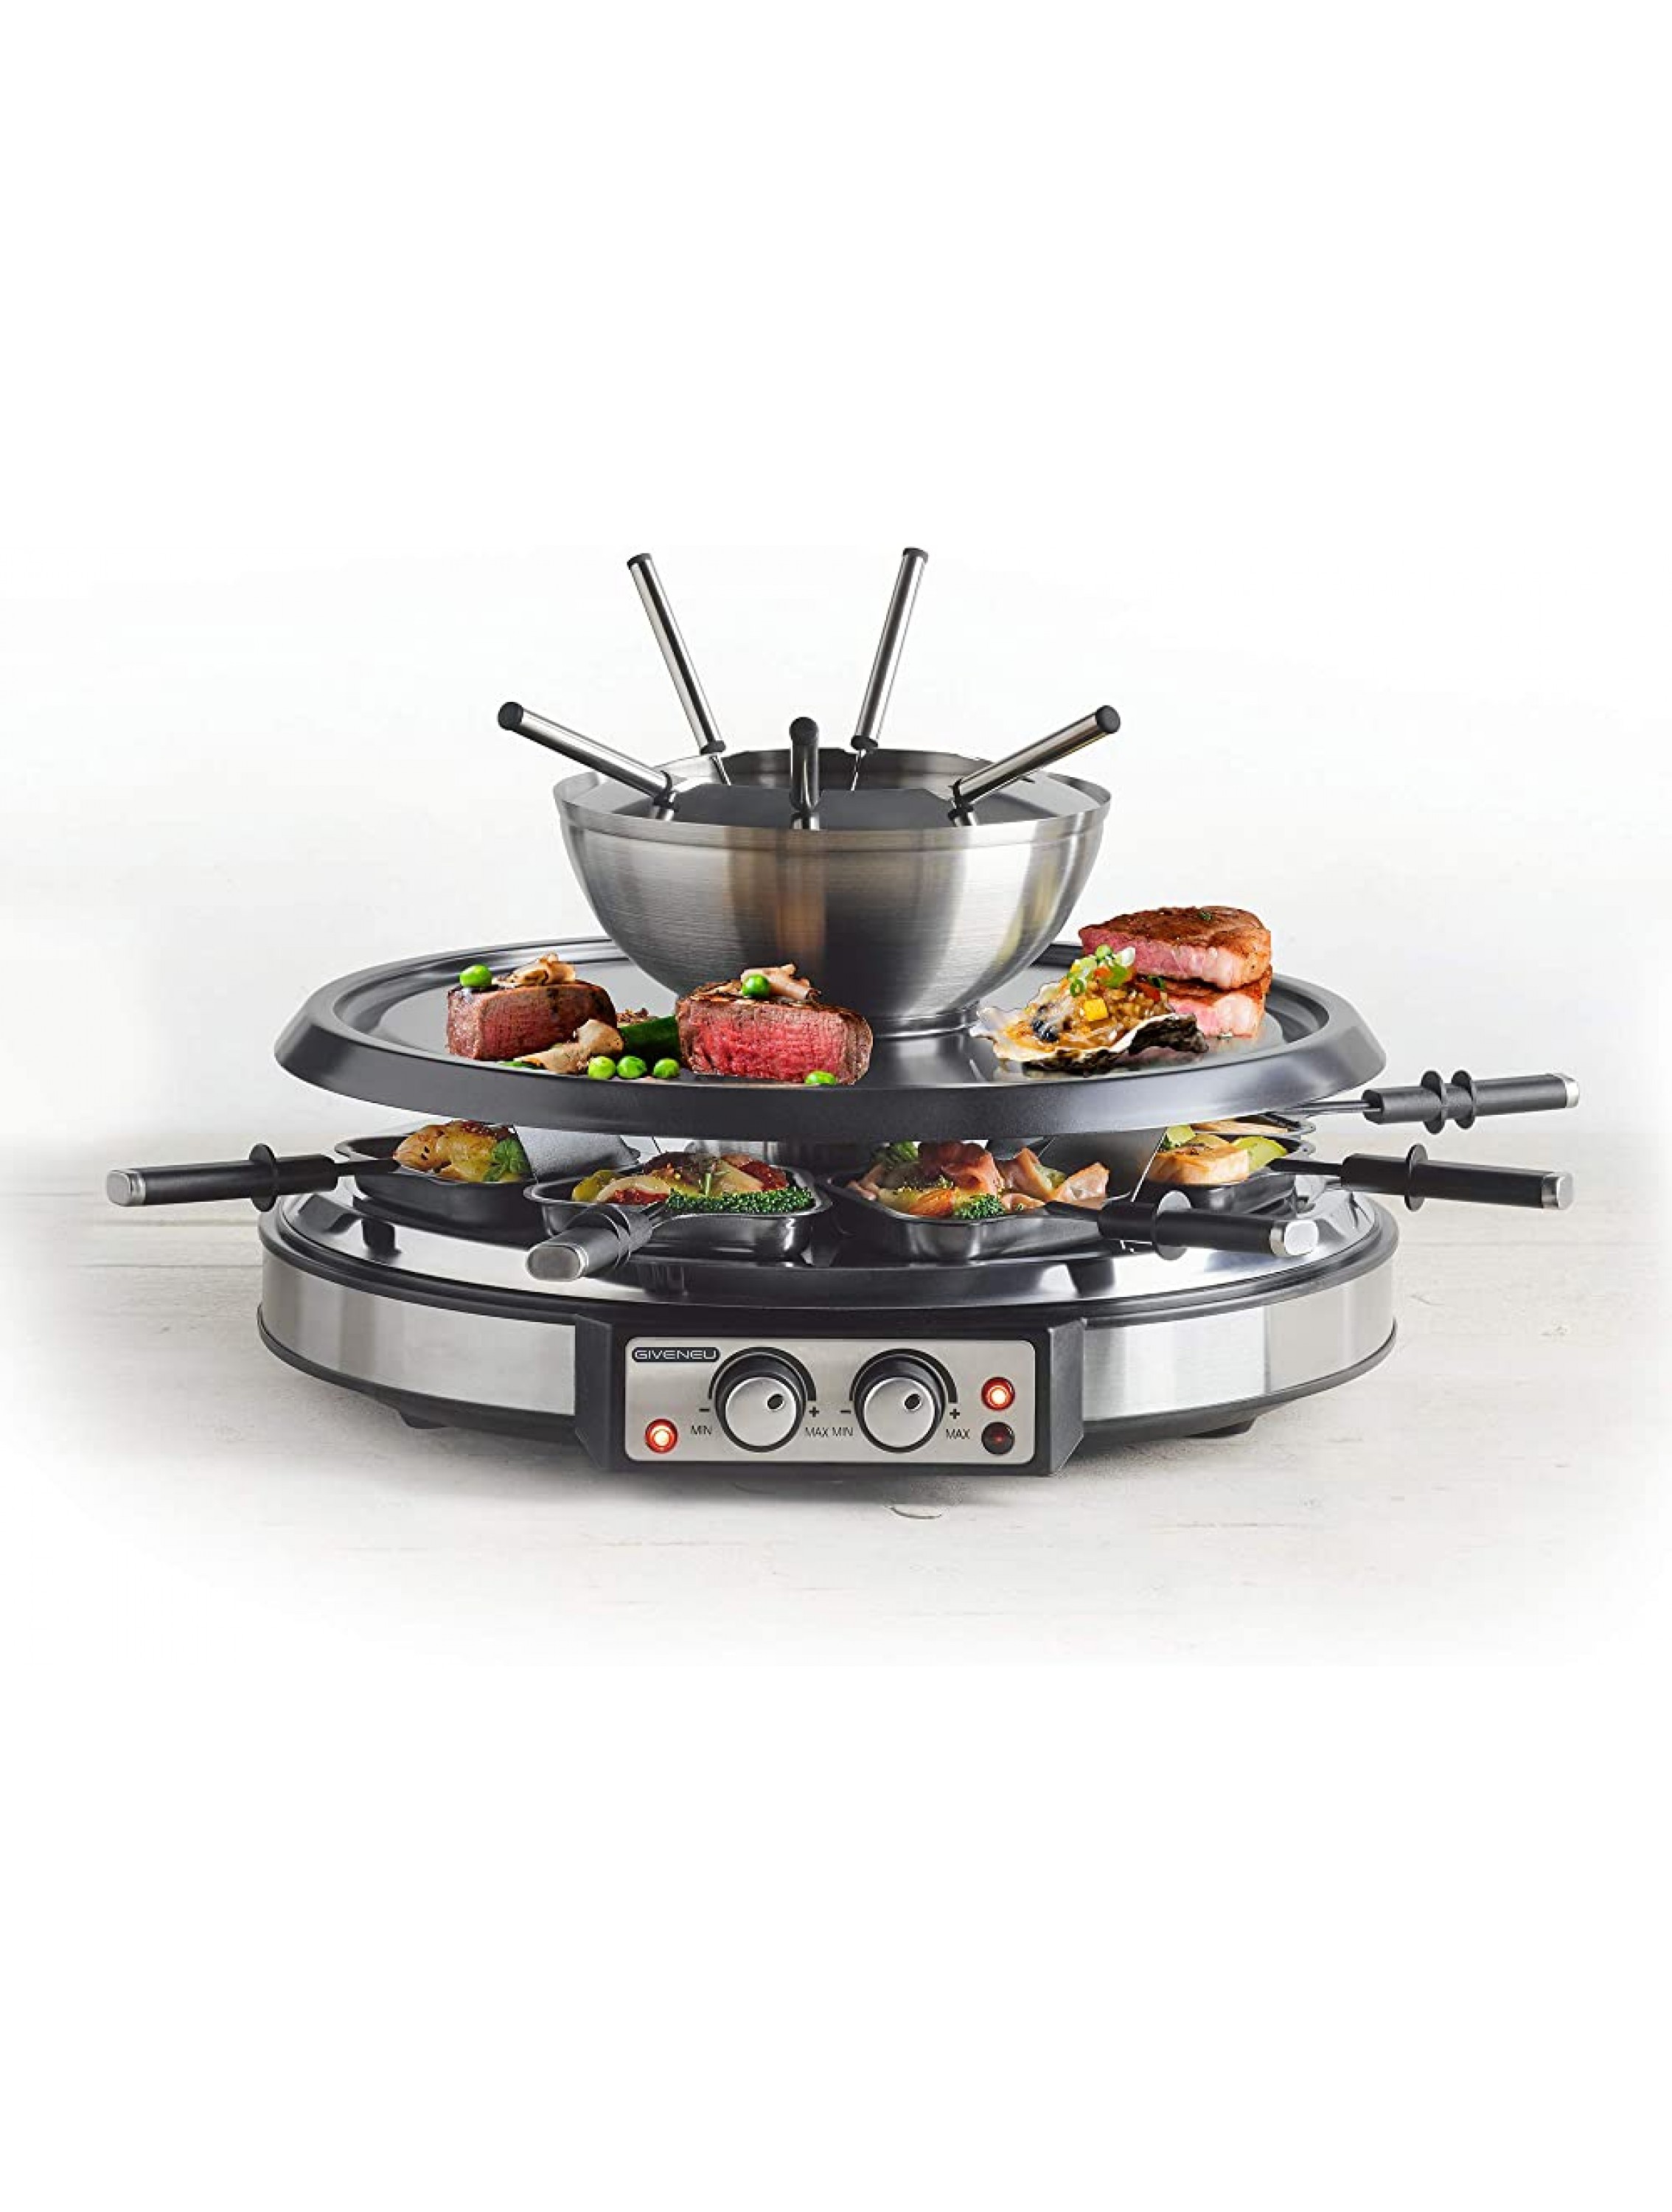 GIVENEU Electric Fondue Pot Sets with BBQ Grill 1500W Fondue Pots with 8 Forks and Electric Raclette BBQ Grill Dual Adjustable Thermostats Perfect Fondue Grill Combo for 8 People Serve - B5JNGI1VQ